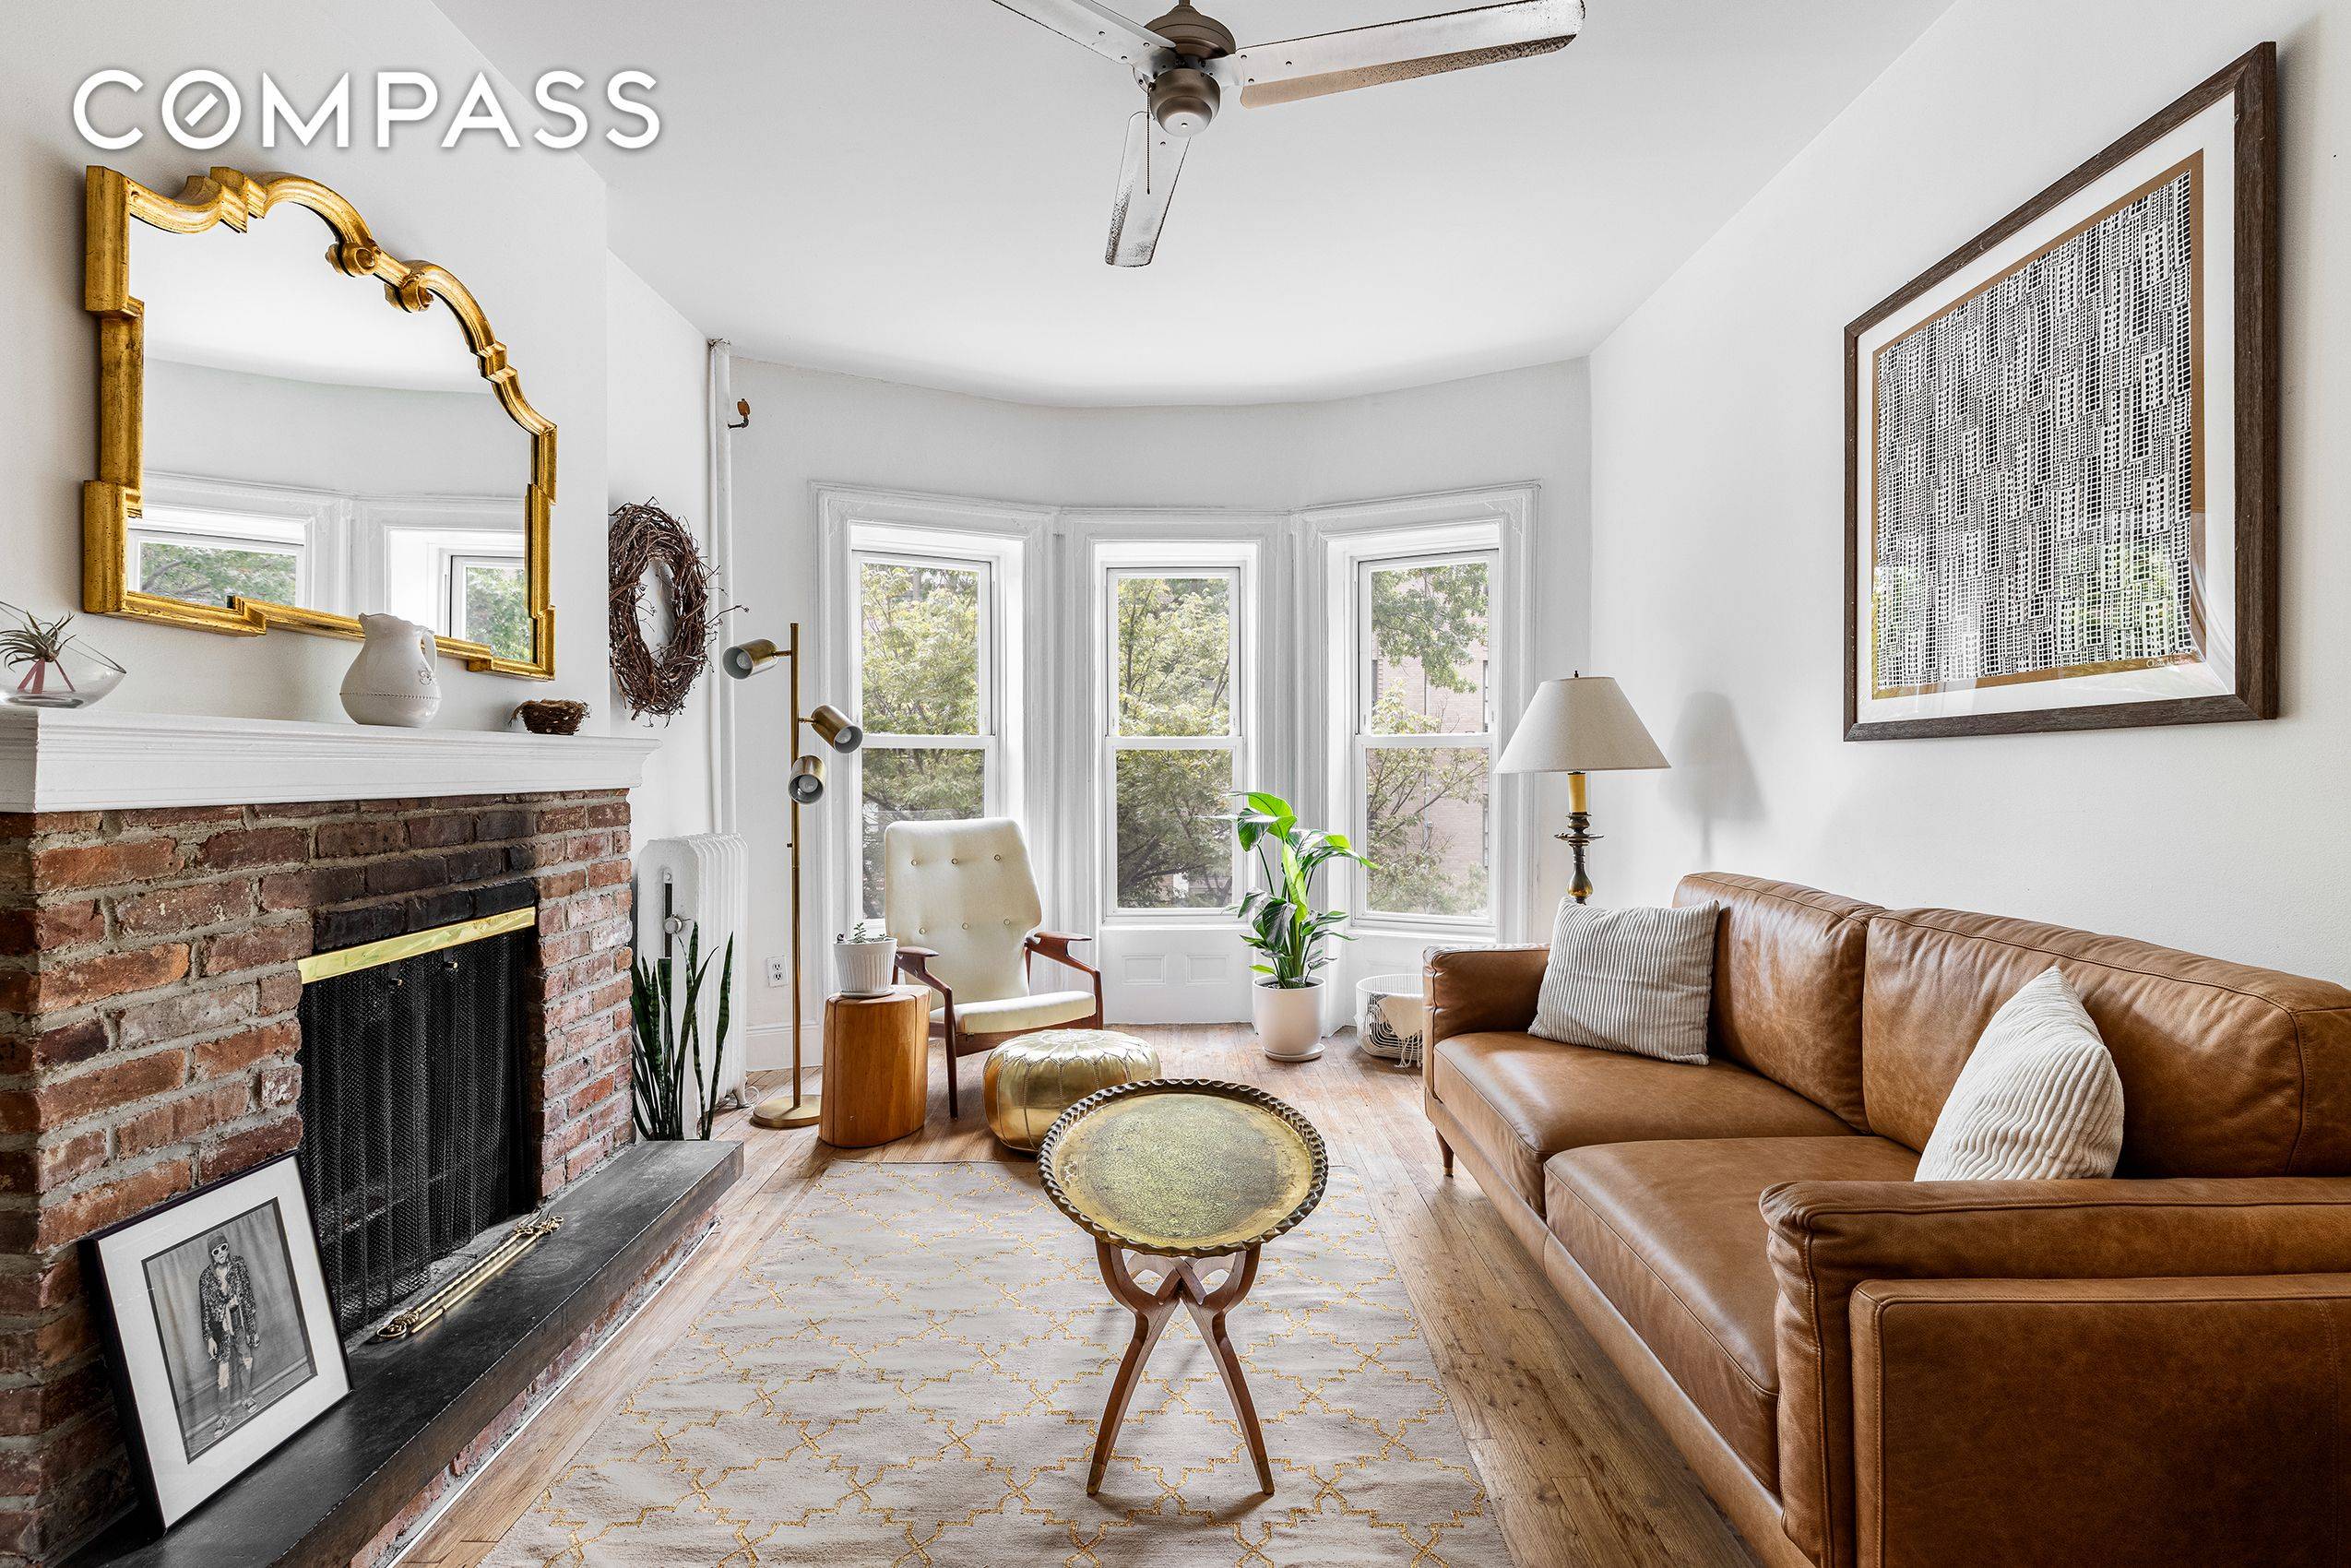 This captivating two bedroom, one and a half bath pre war home offers you a peaceful retreat right in the heart of beautiful Park Slope.